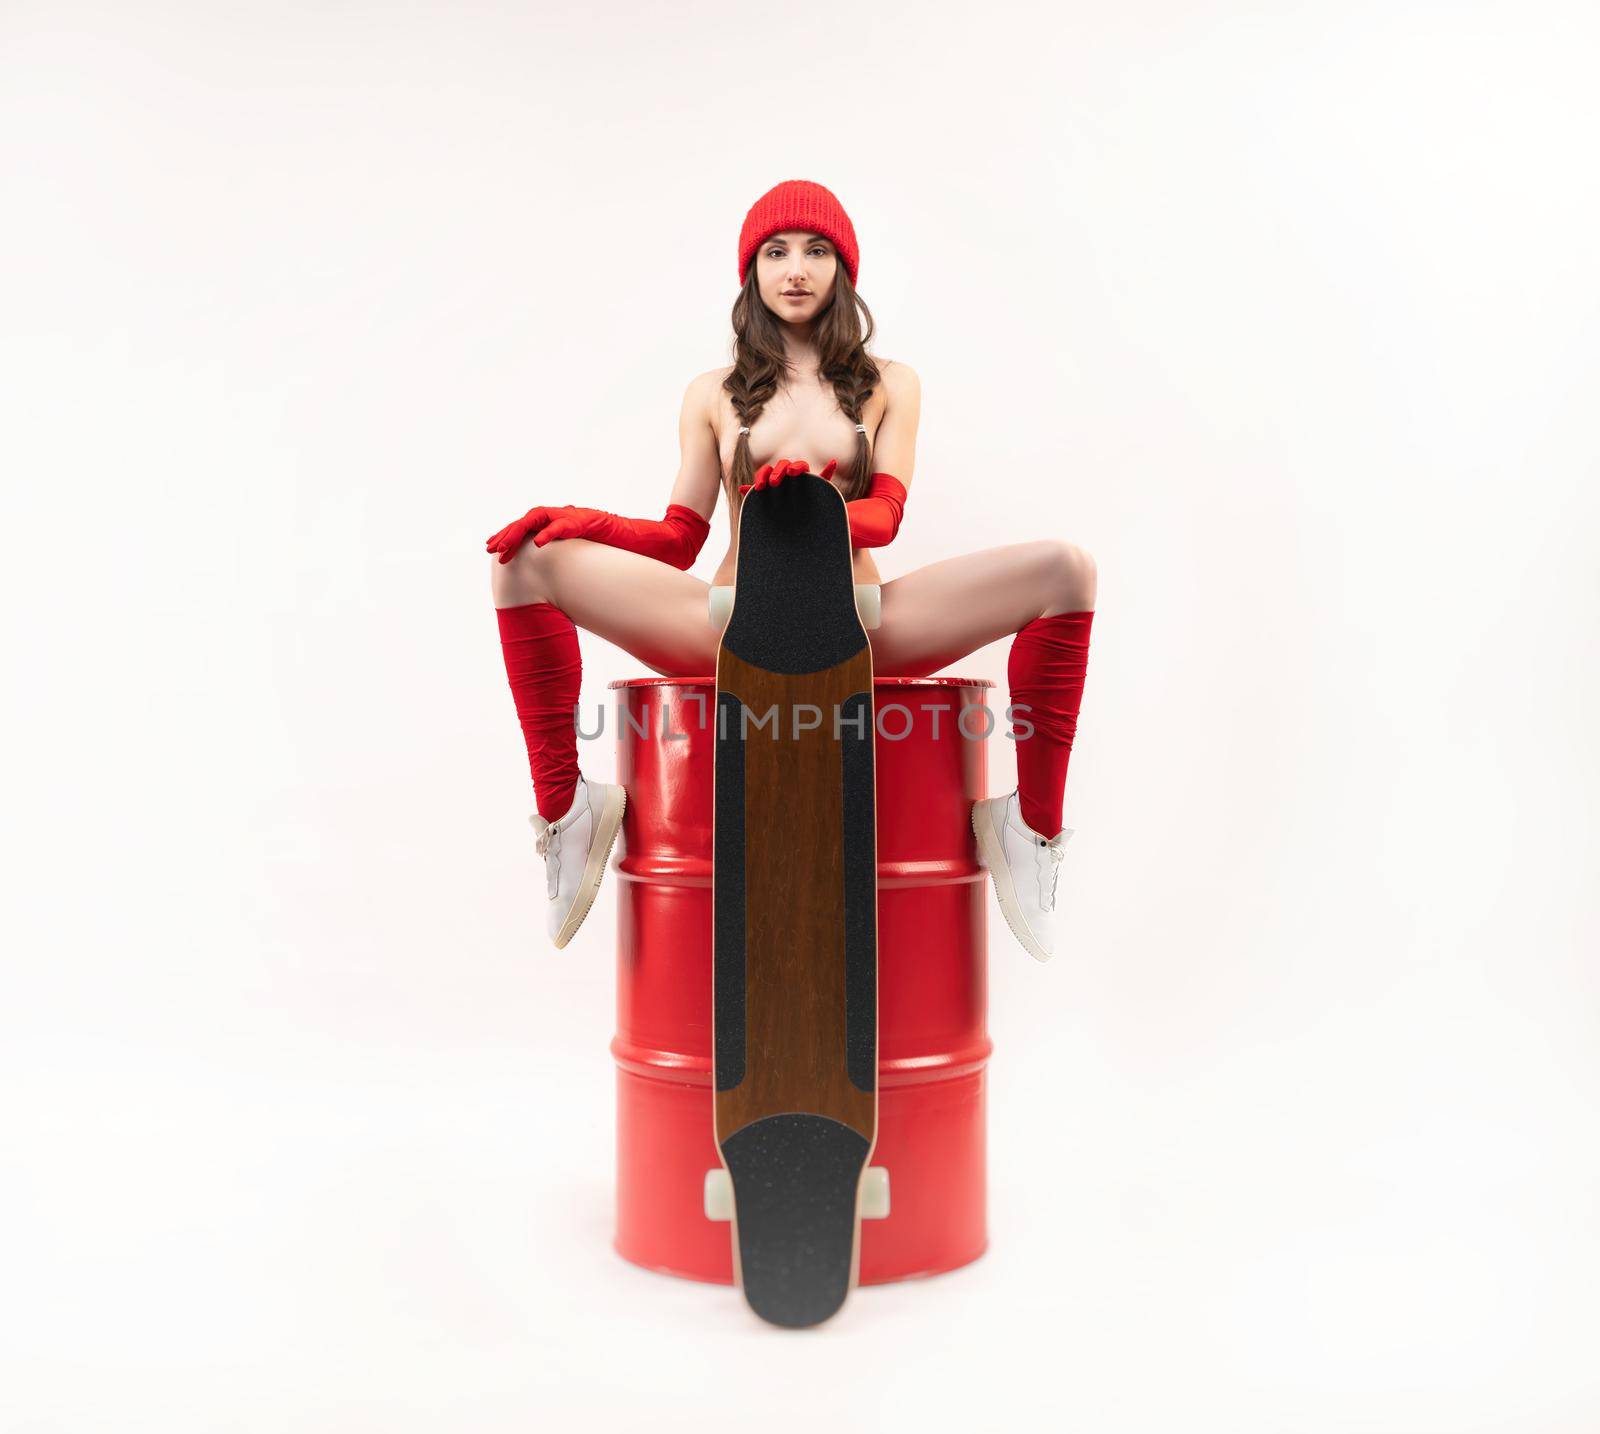 naked skater girl with a longboard in a red hat and socks sits sexy on a red barrel on a white background